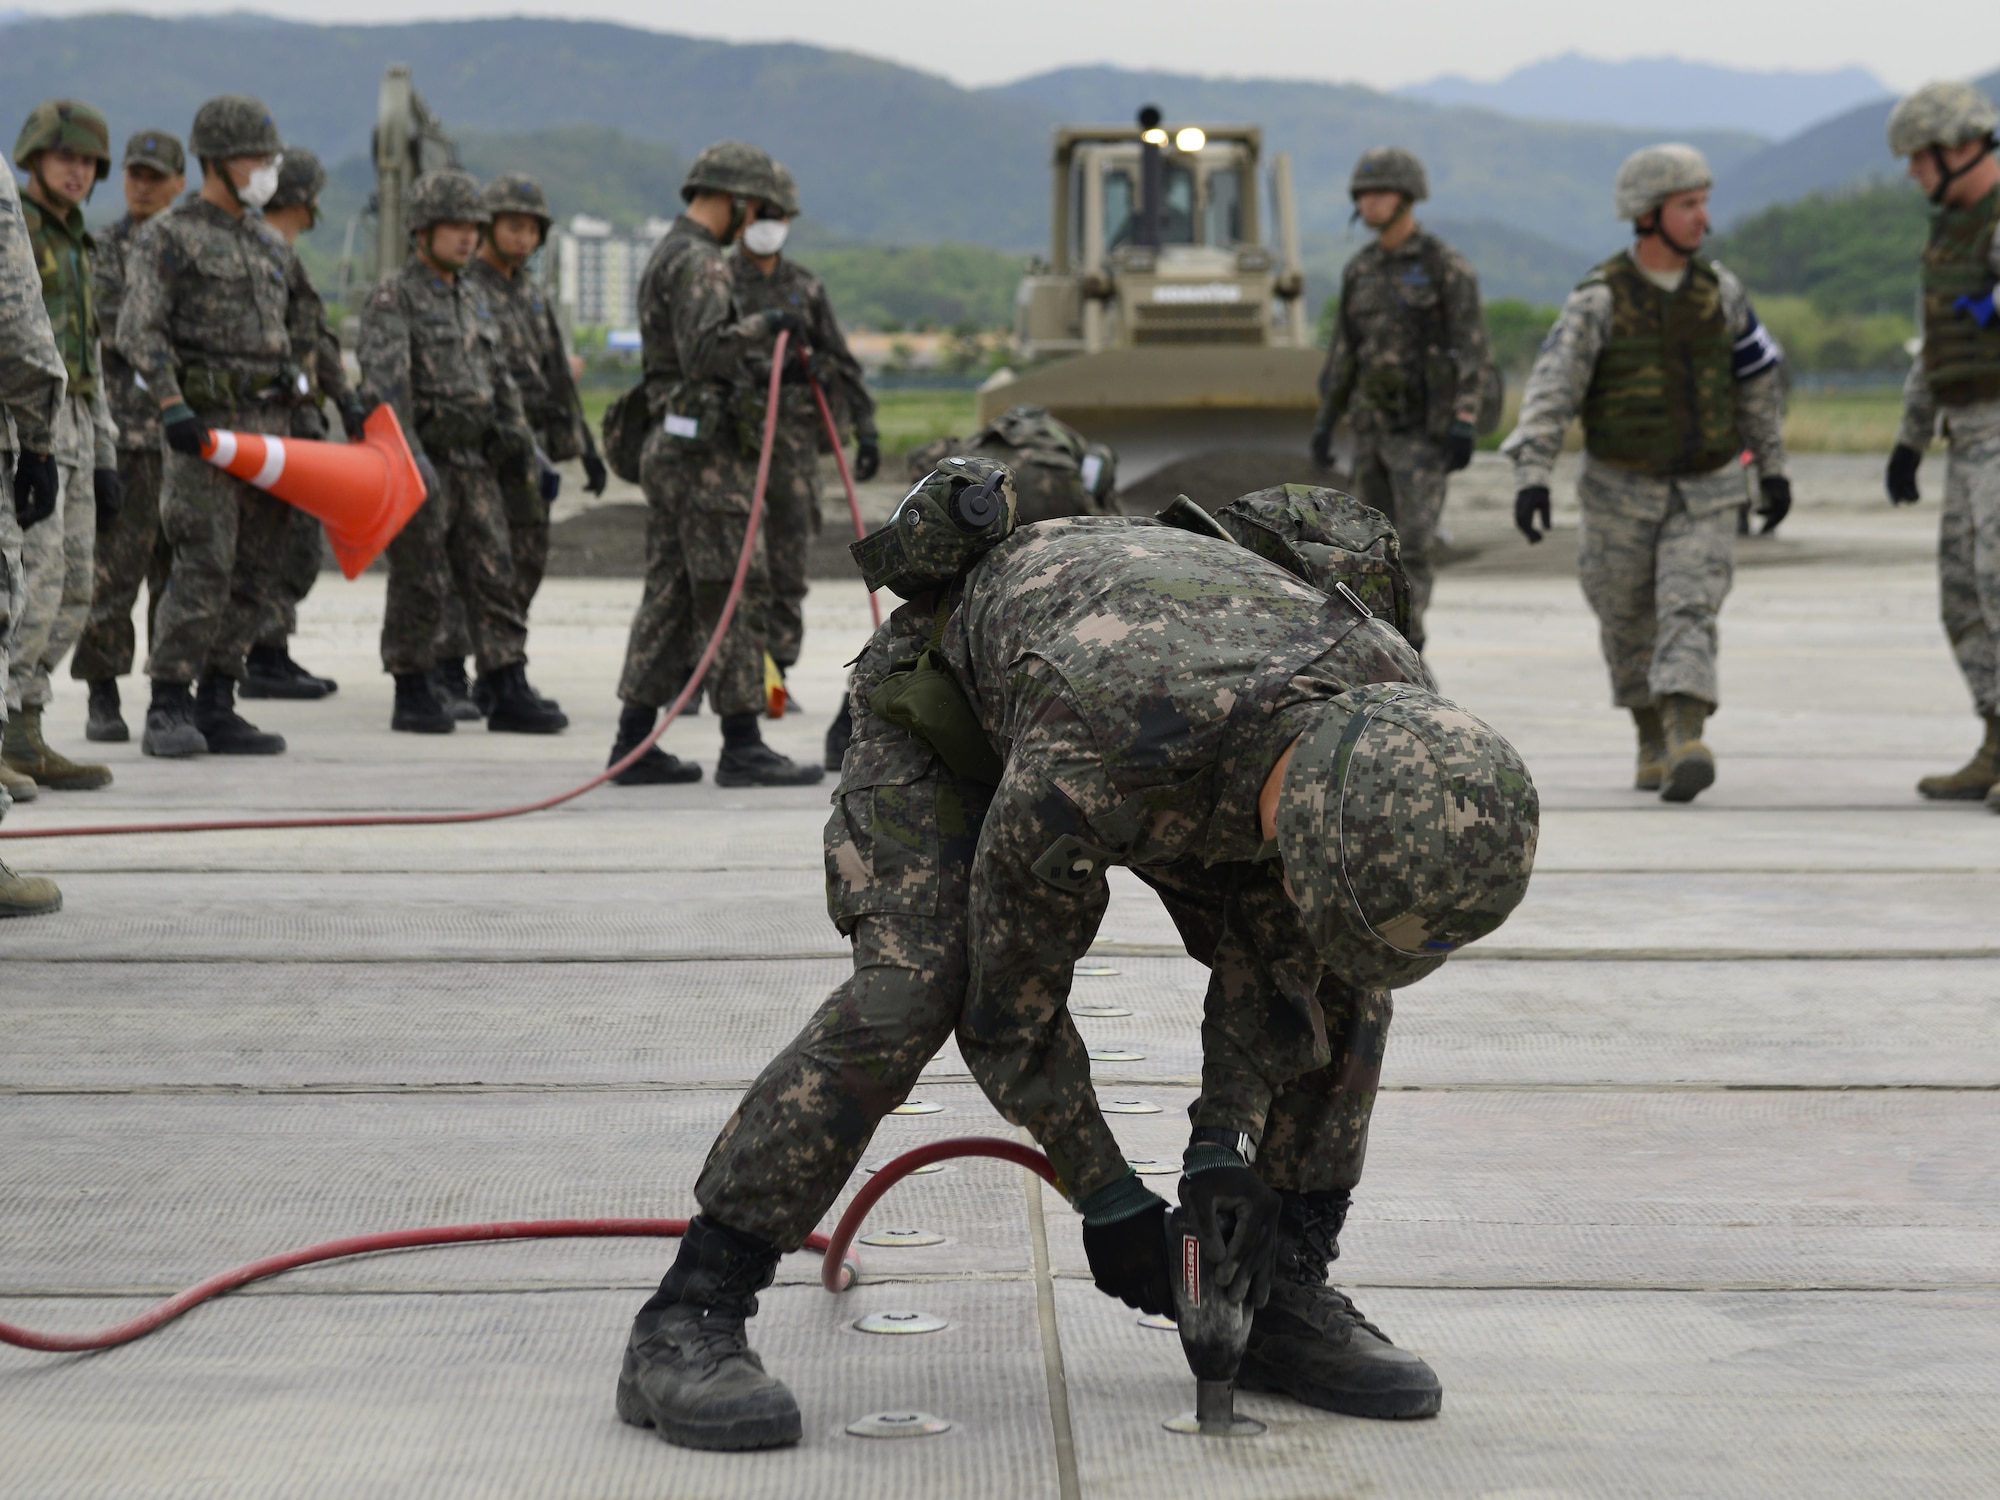 A Republic of Korea Airman secures a rapid-runway repair fiberglass mat during the U.S./ROK Combined Airfield Damage Repair Exercise at Daegu Air Base, April 20, 2017. After the mat is set up, Airmen place it over sections of damaged runway to ensure a safe launch and recovery of aircraft. (U.S. Air Force photo by Staff Sgt. Alex Fox Echols III)